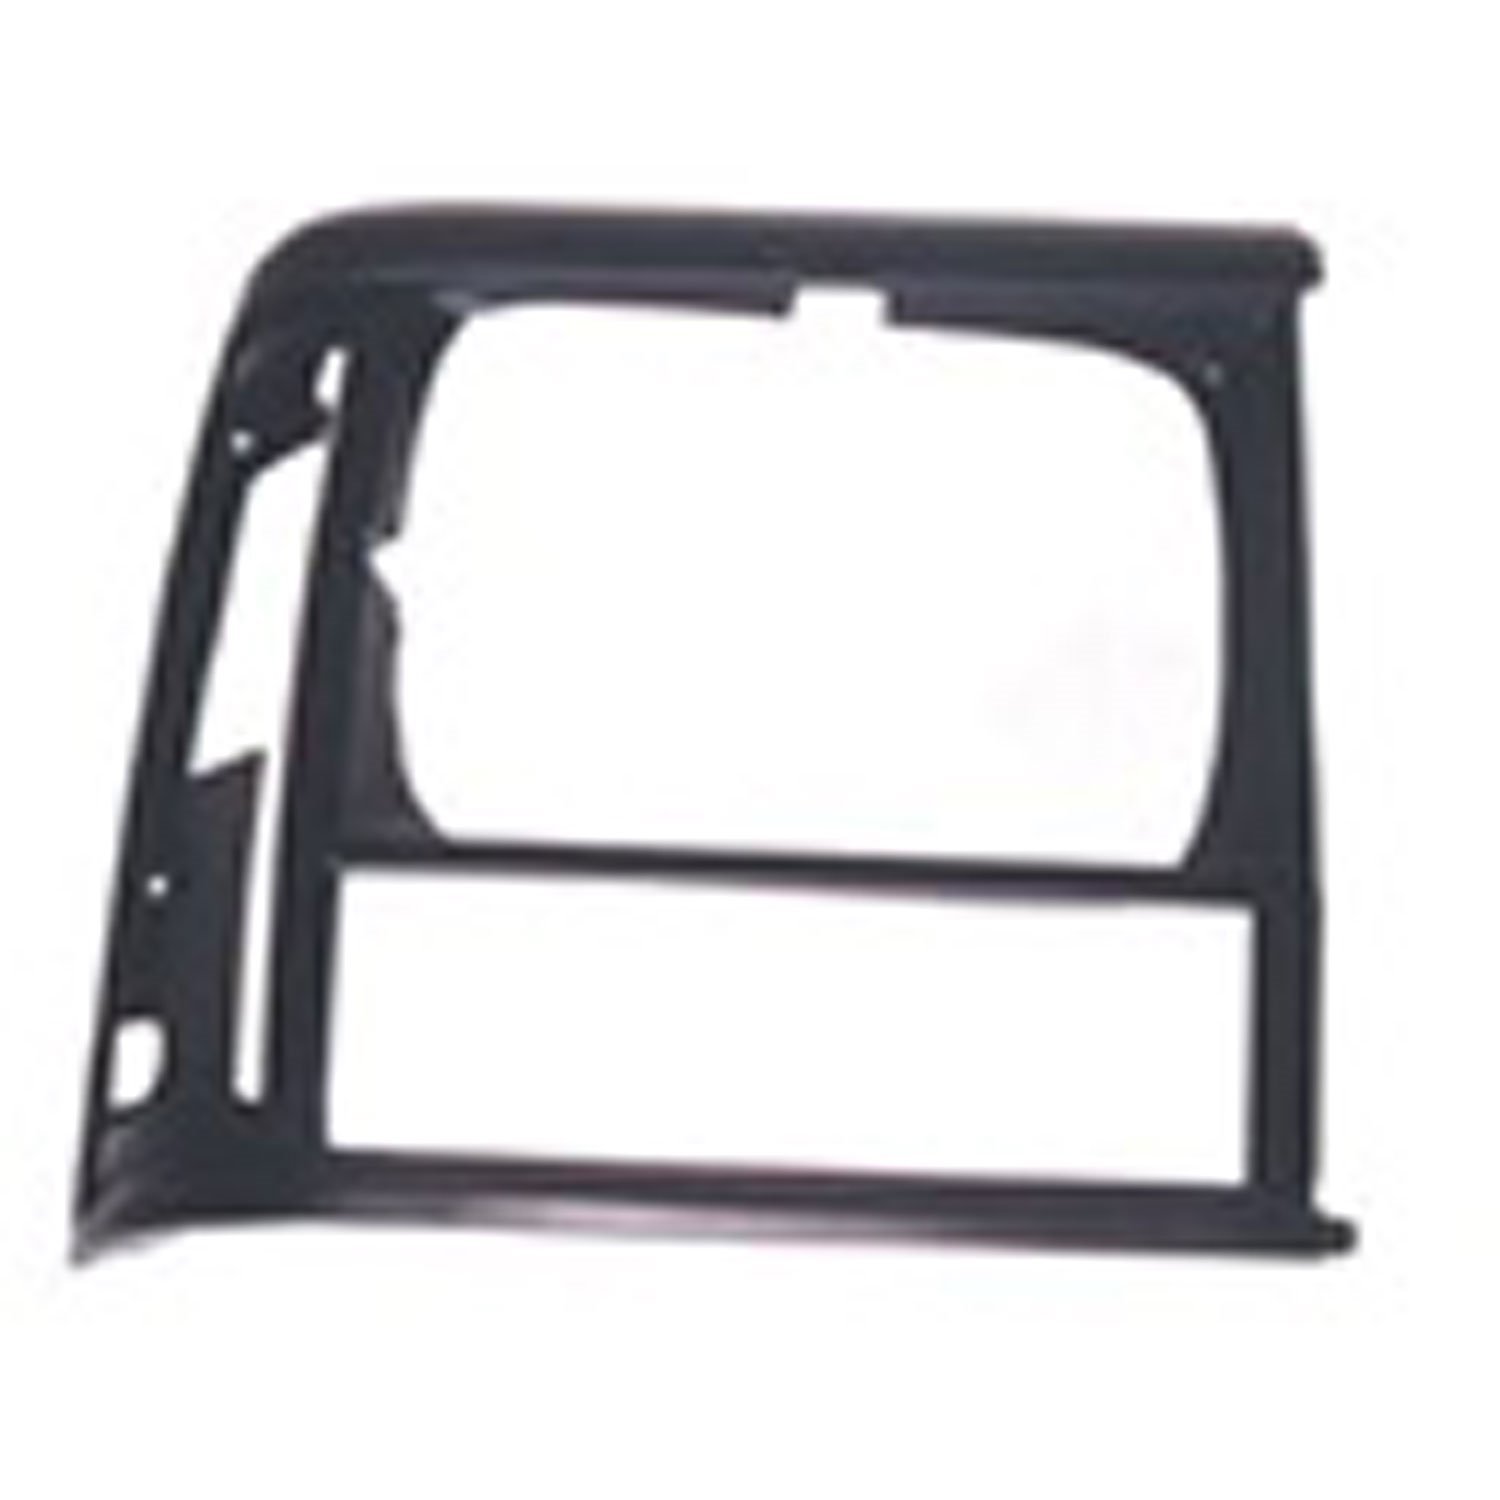 This black headlight bezel from Omix-ADA fits the right side on 91-96 Jeep Cherokee XJ.